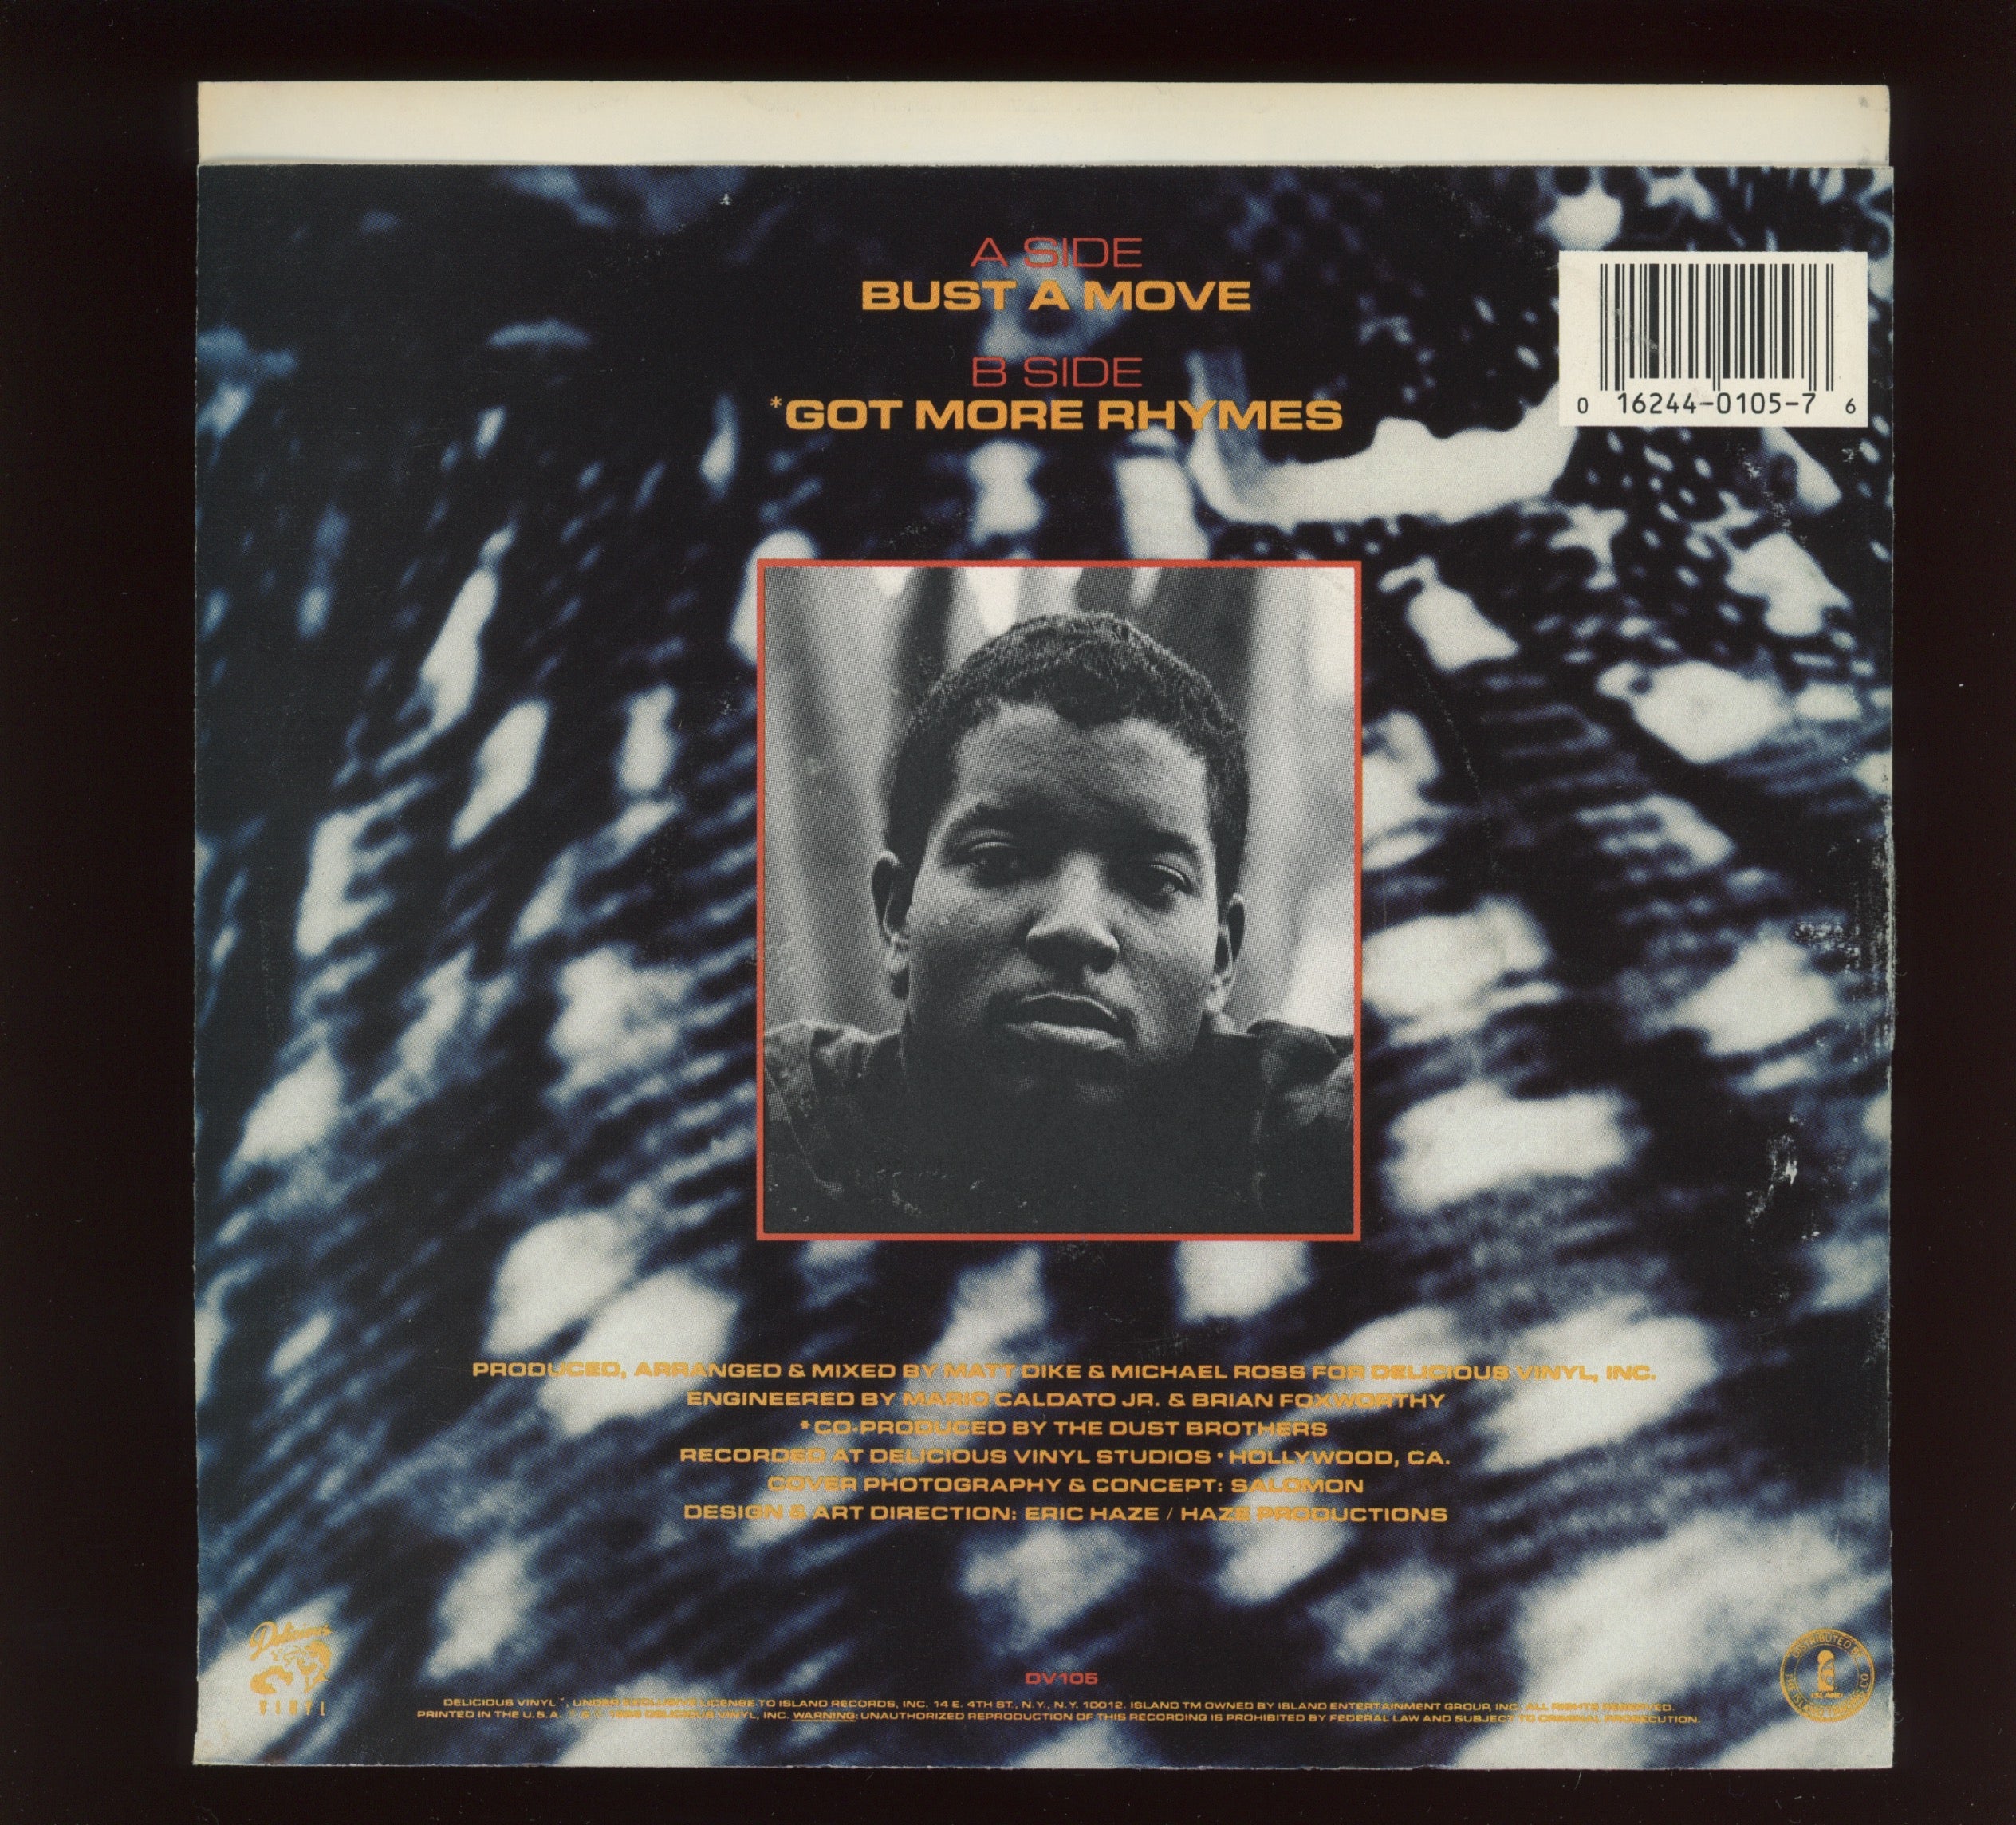 Young MC - Bust A Move on Delicious Vinyl With Picture Sleeve